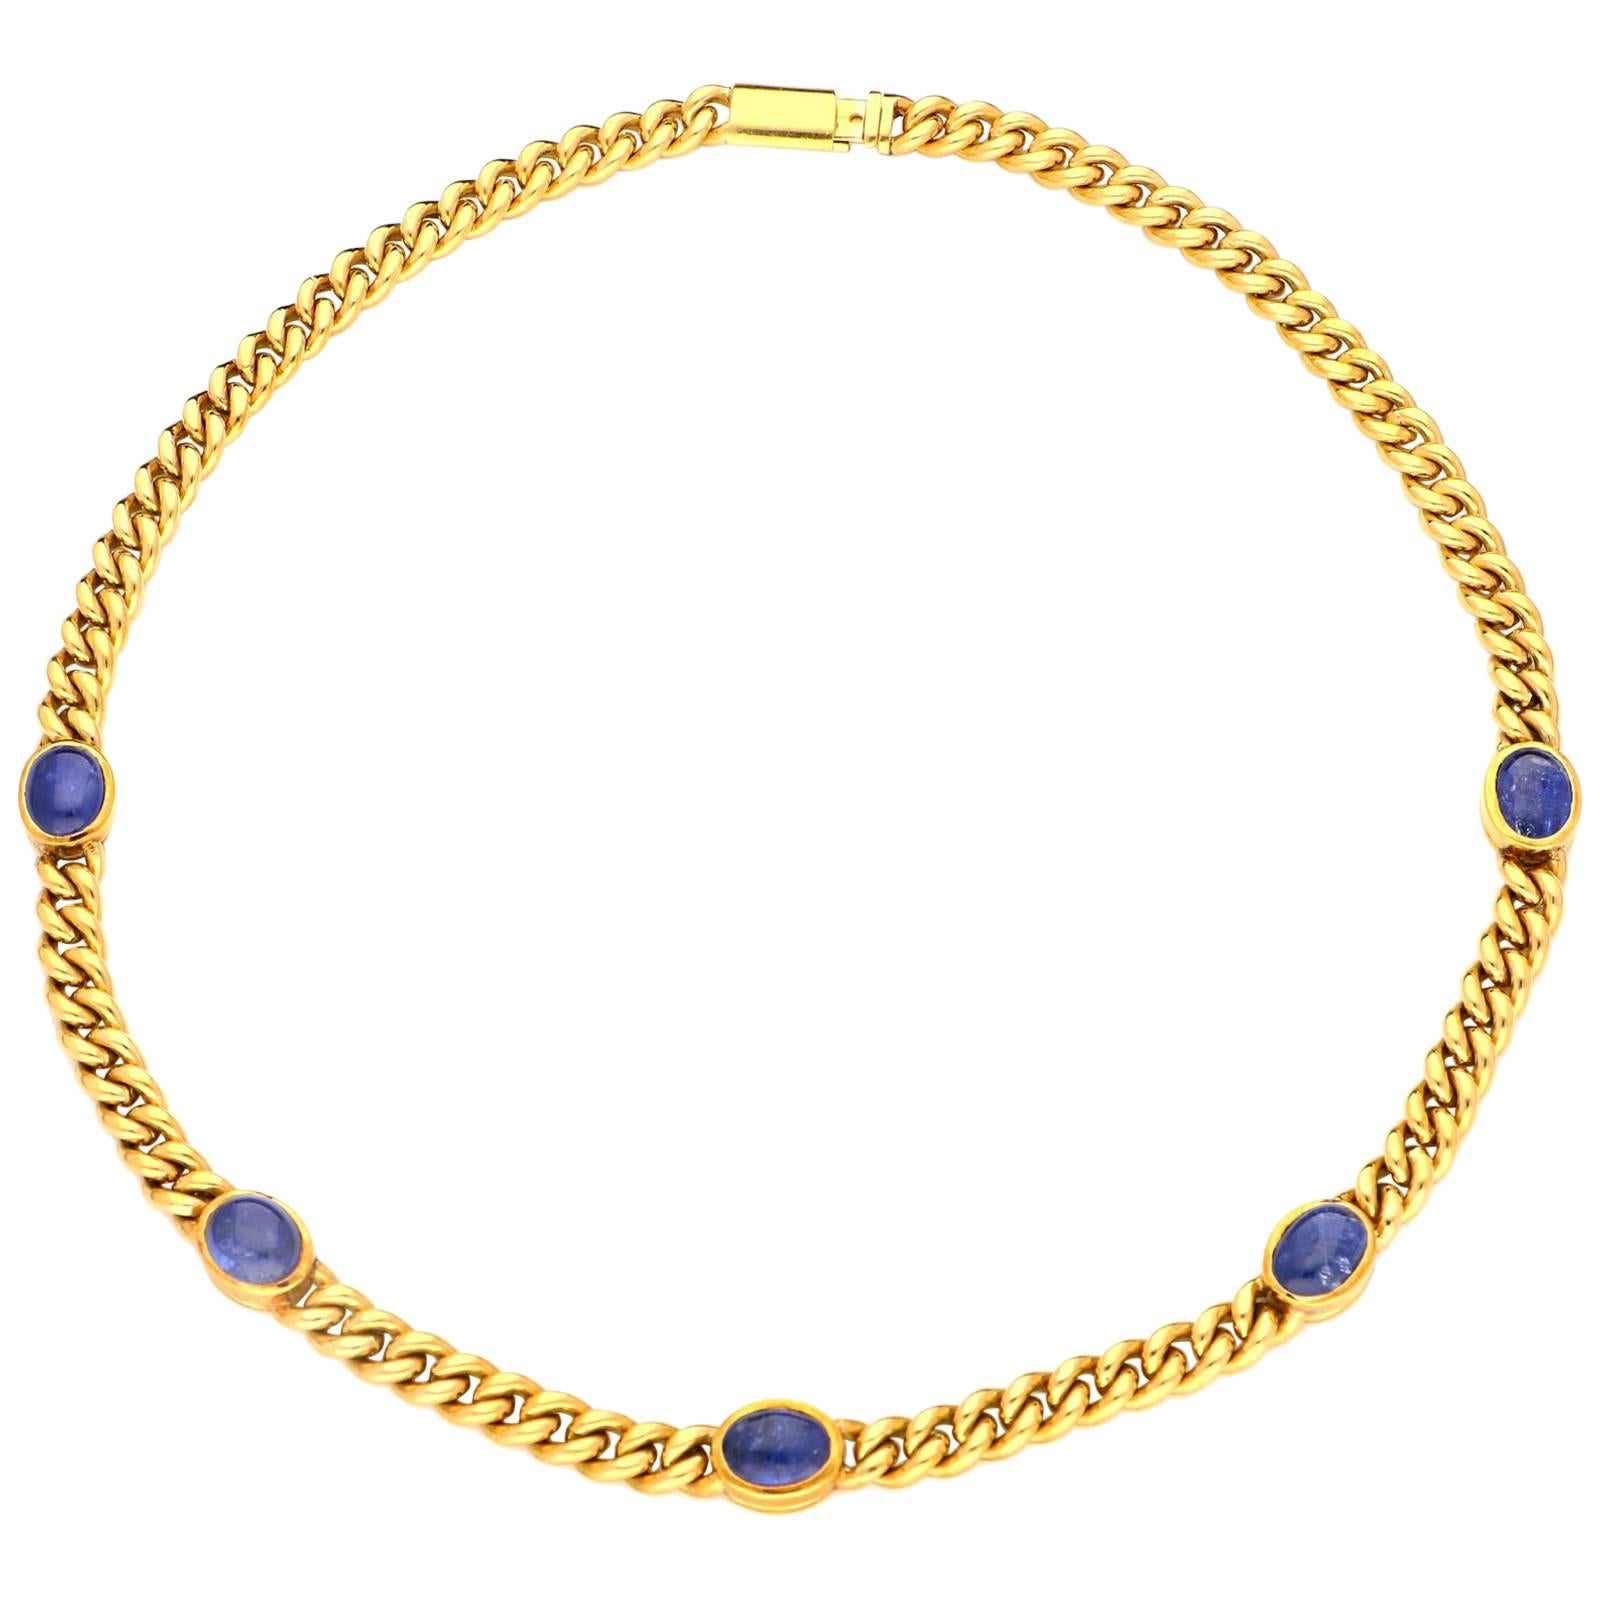 Bulgari 18 Carat Yellow Gold Curb Link Chain Set with Sapphire Oval Cabochons